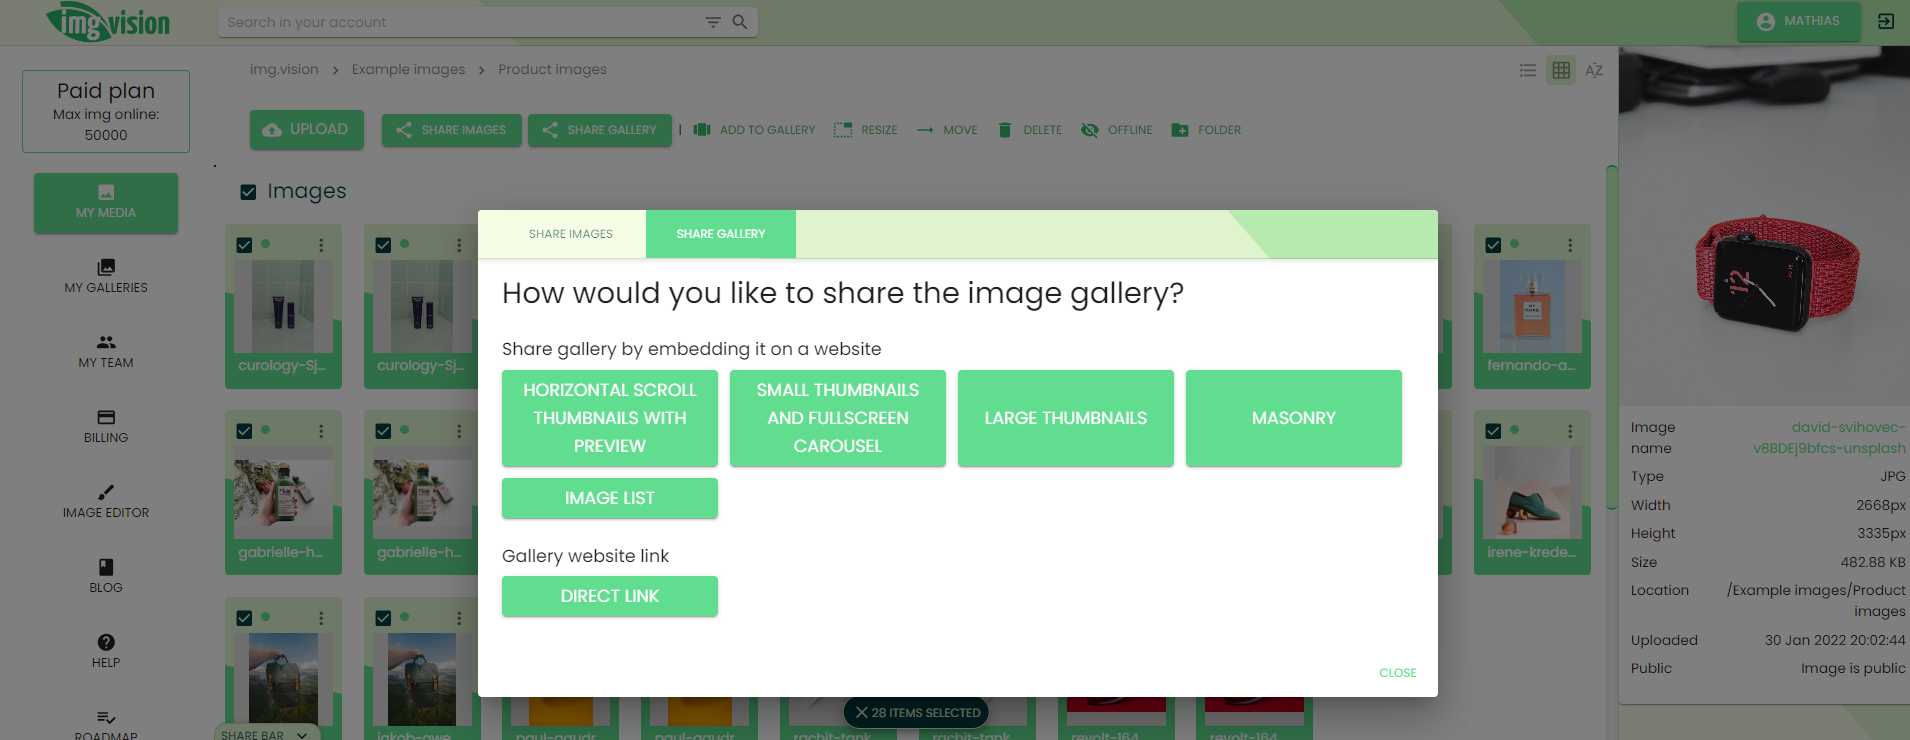 Img.vision Share code for embedding galleries on any site